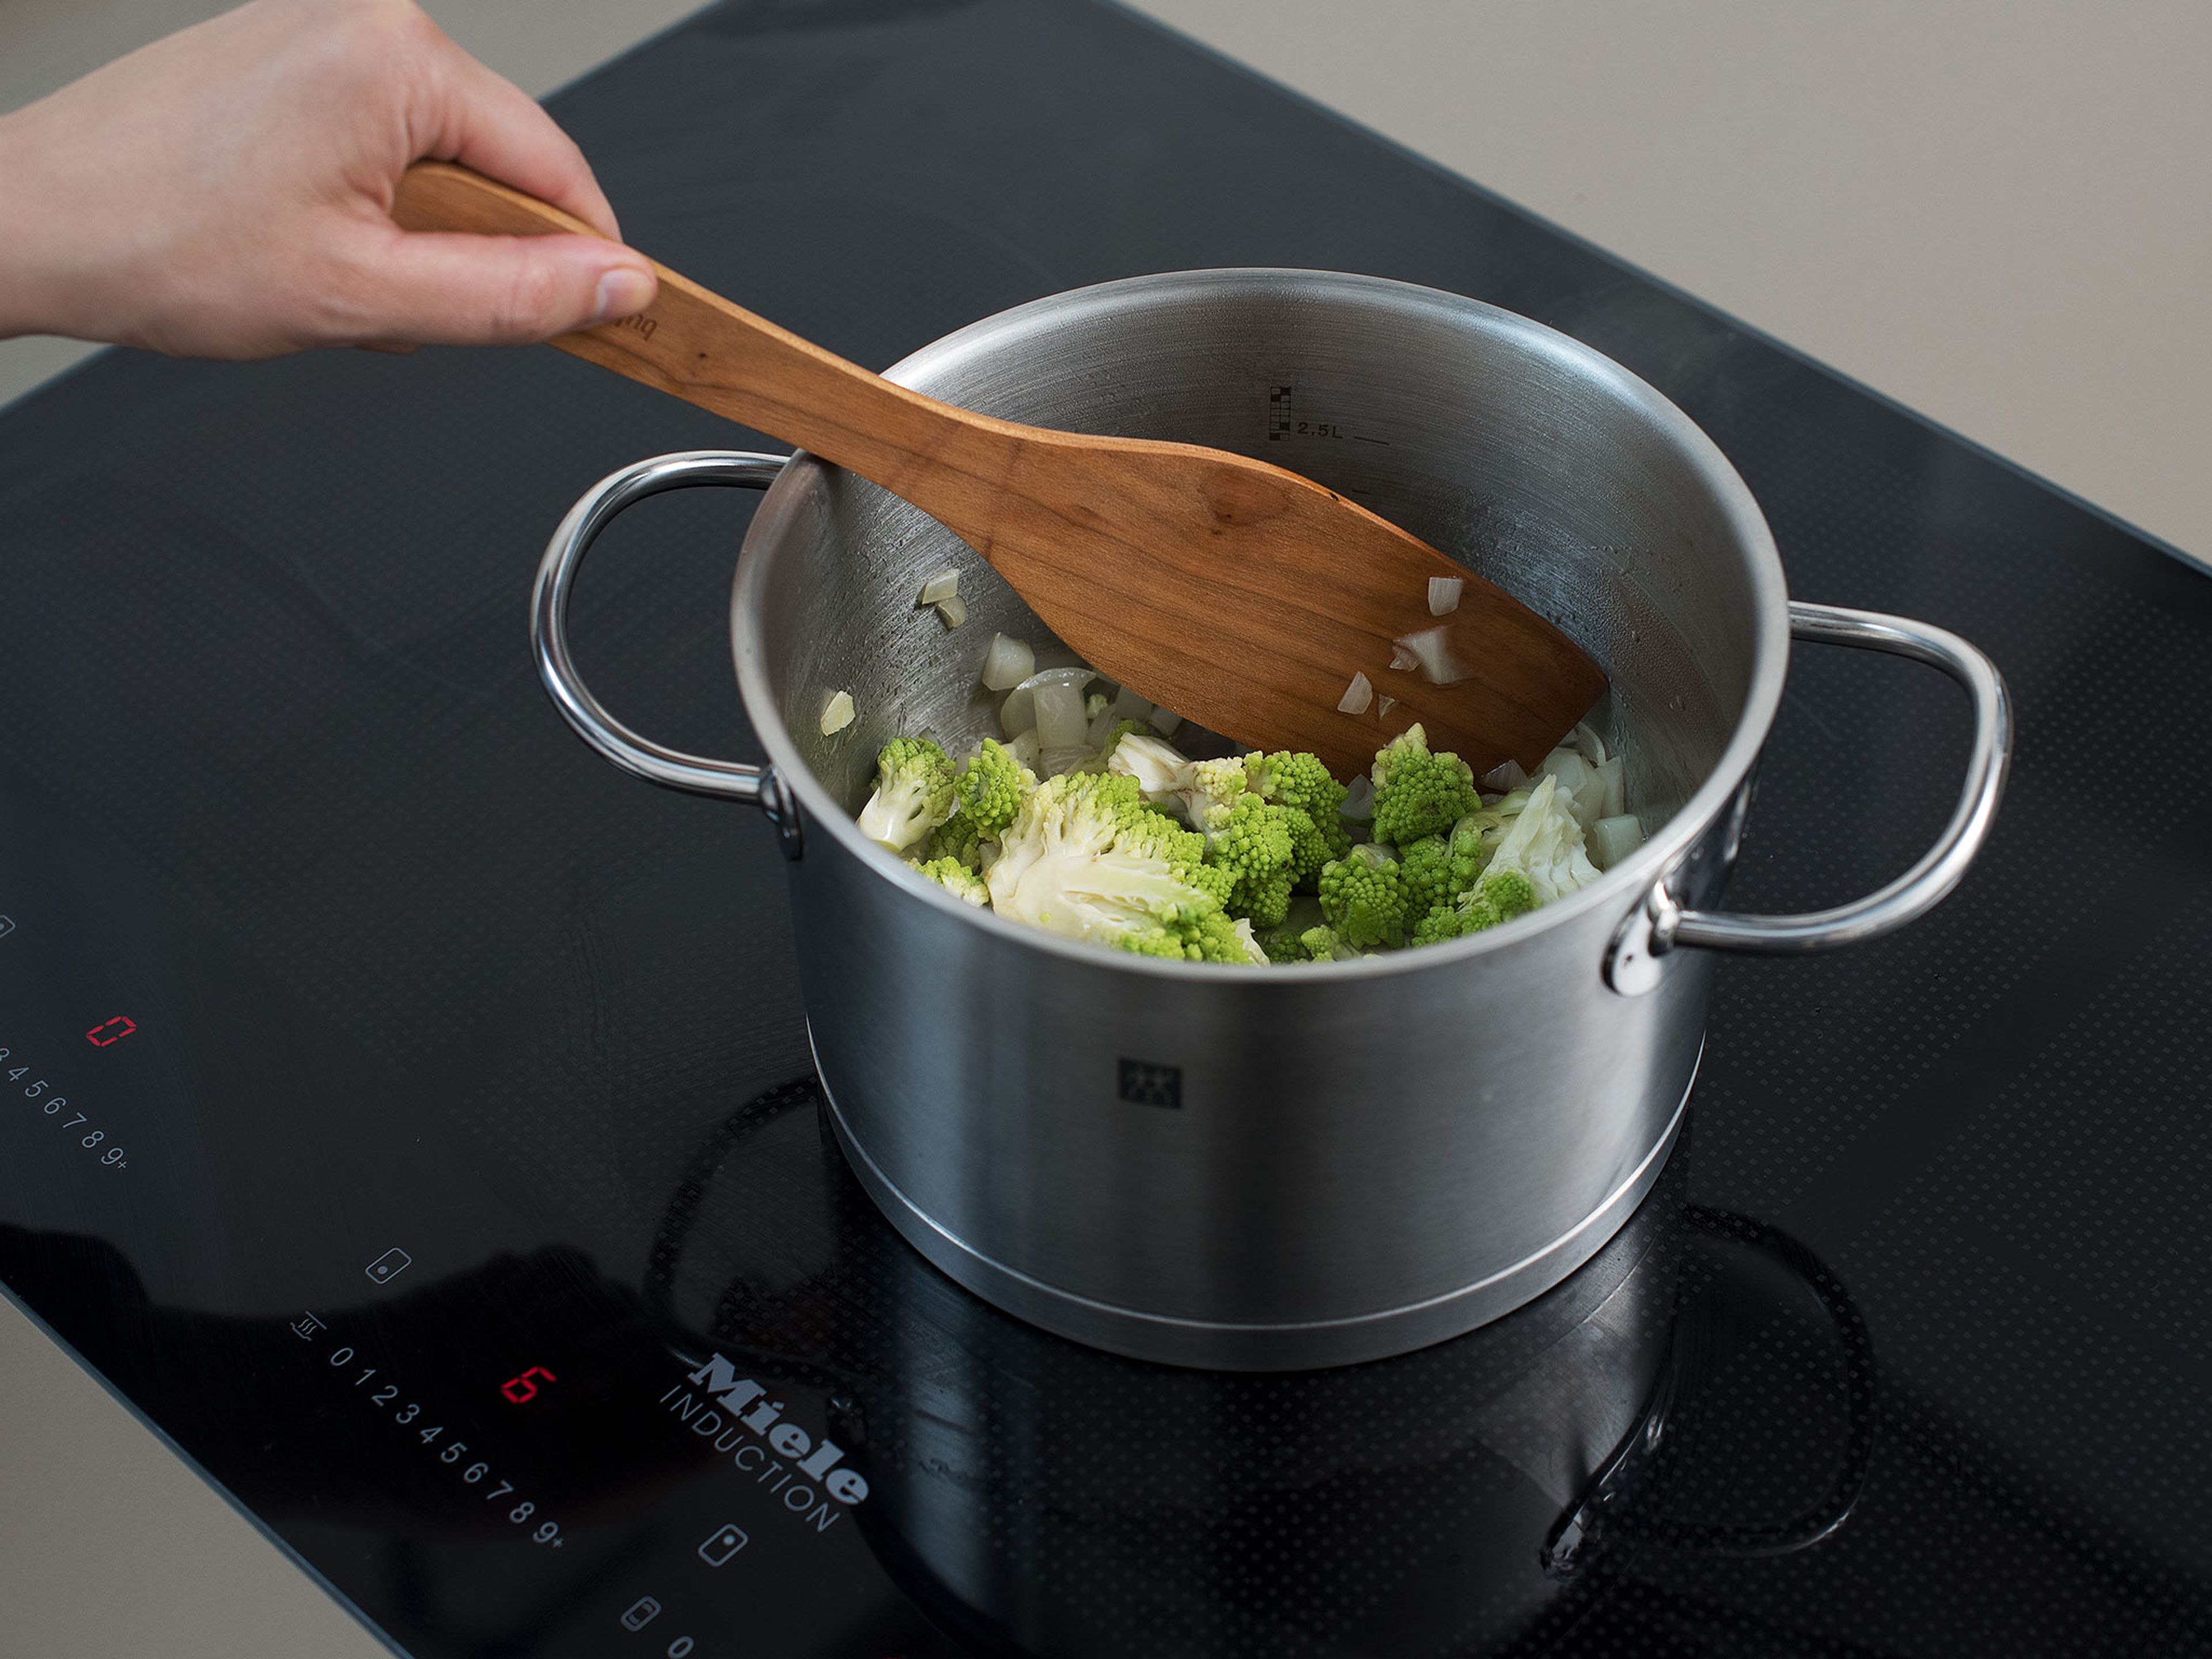 Heat the olive oil in the pot over medium-high heat and sauté the onion for approx. 1 min. Reduce heat, add Romanesco, and fry for approx. 3 min. Add the bay leaf and turmeric, then add coconut milk and water. Add salt to taste and simmer for approx. 15 min.